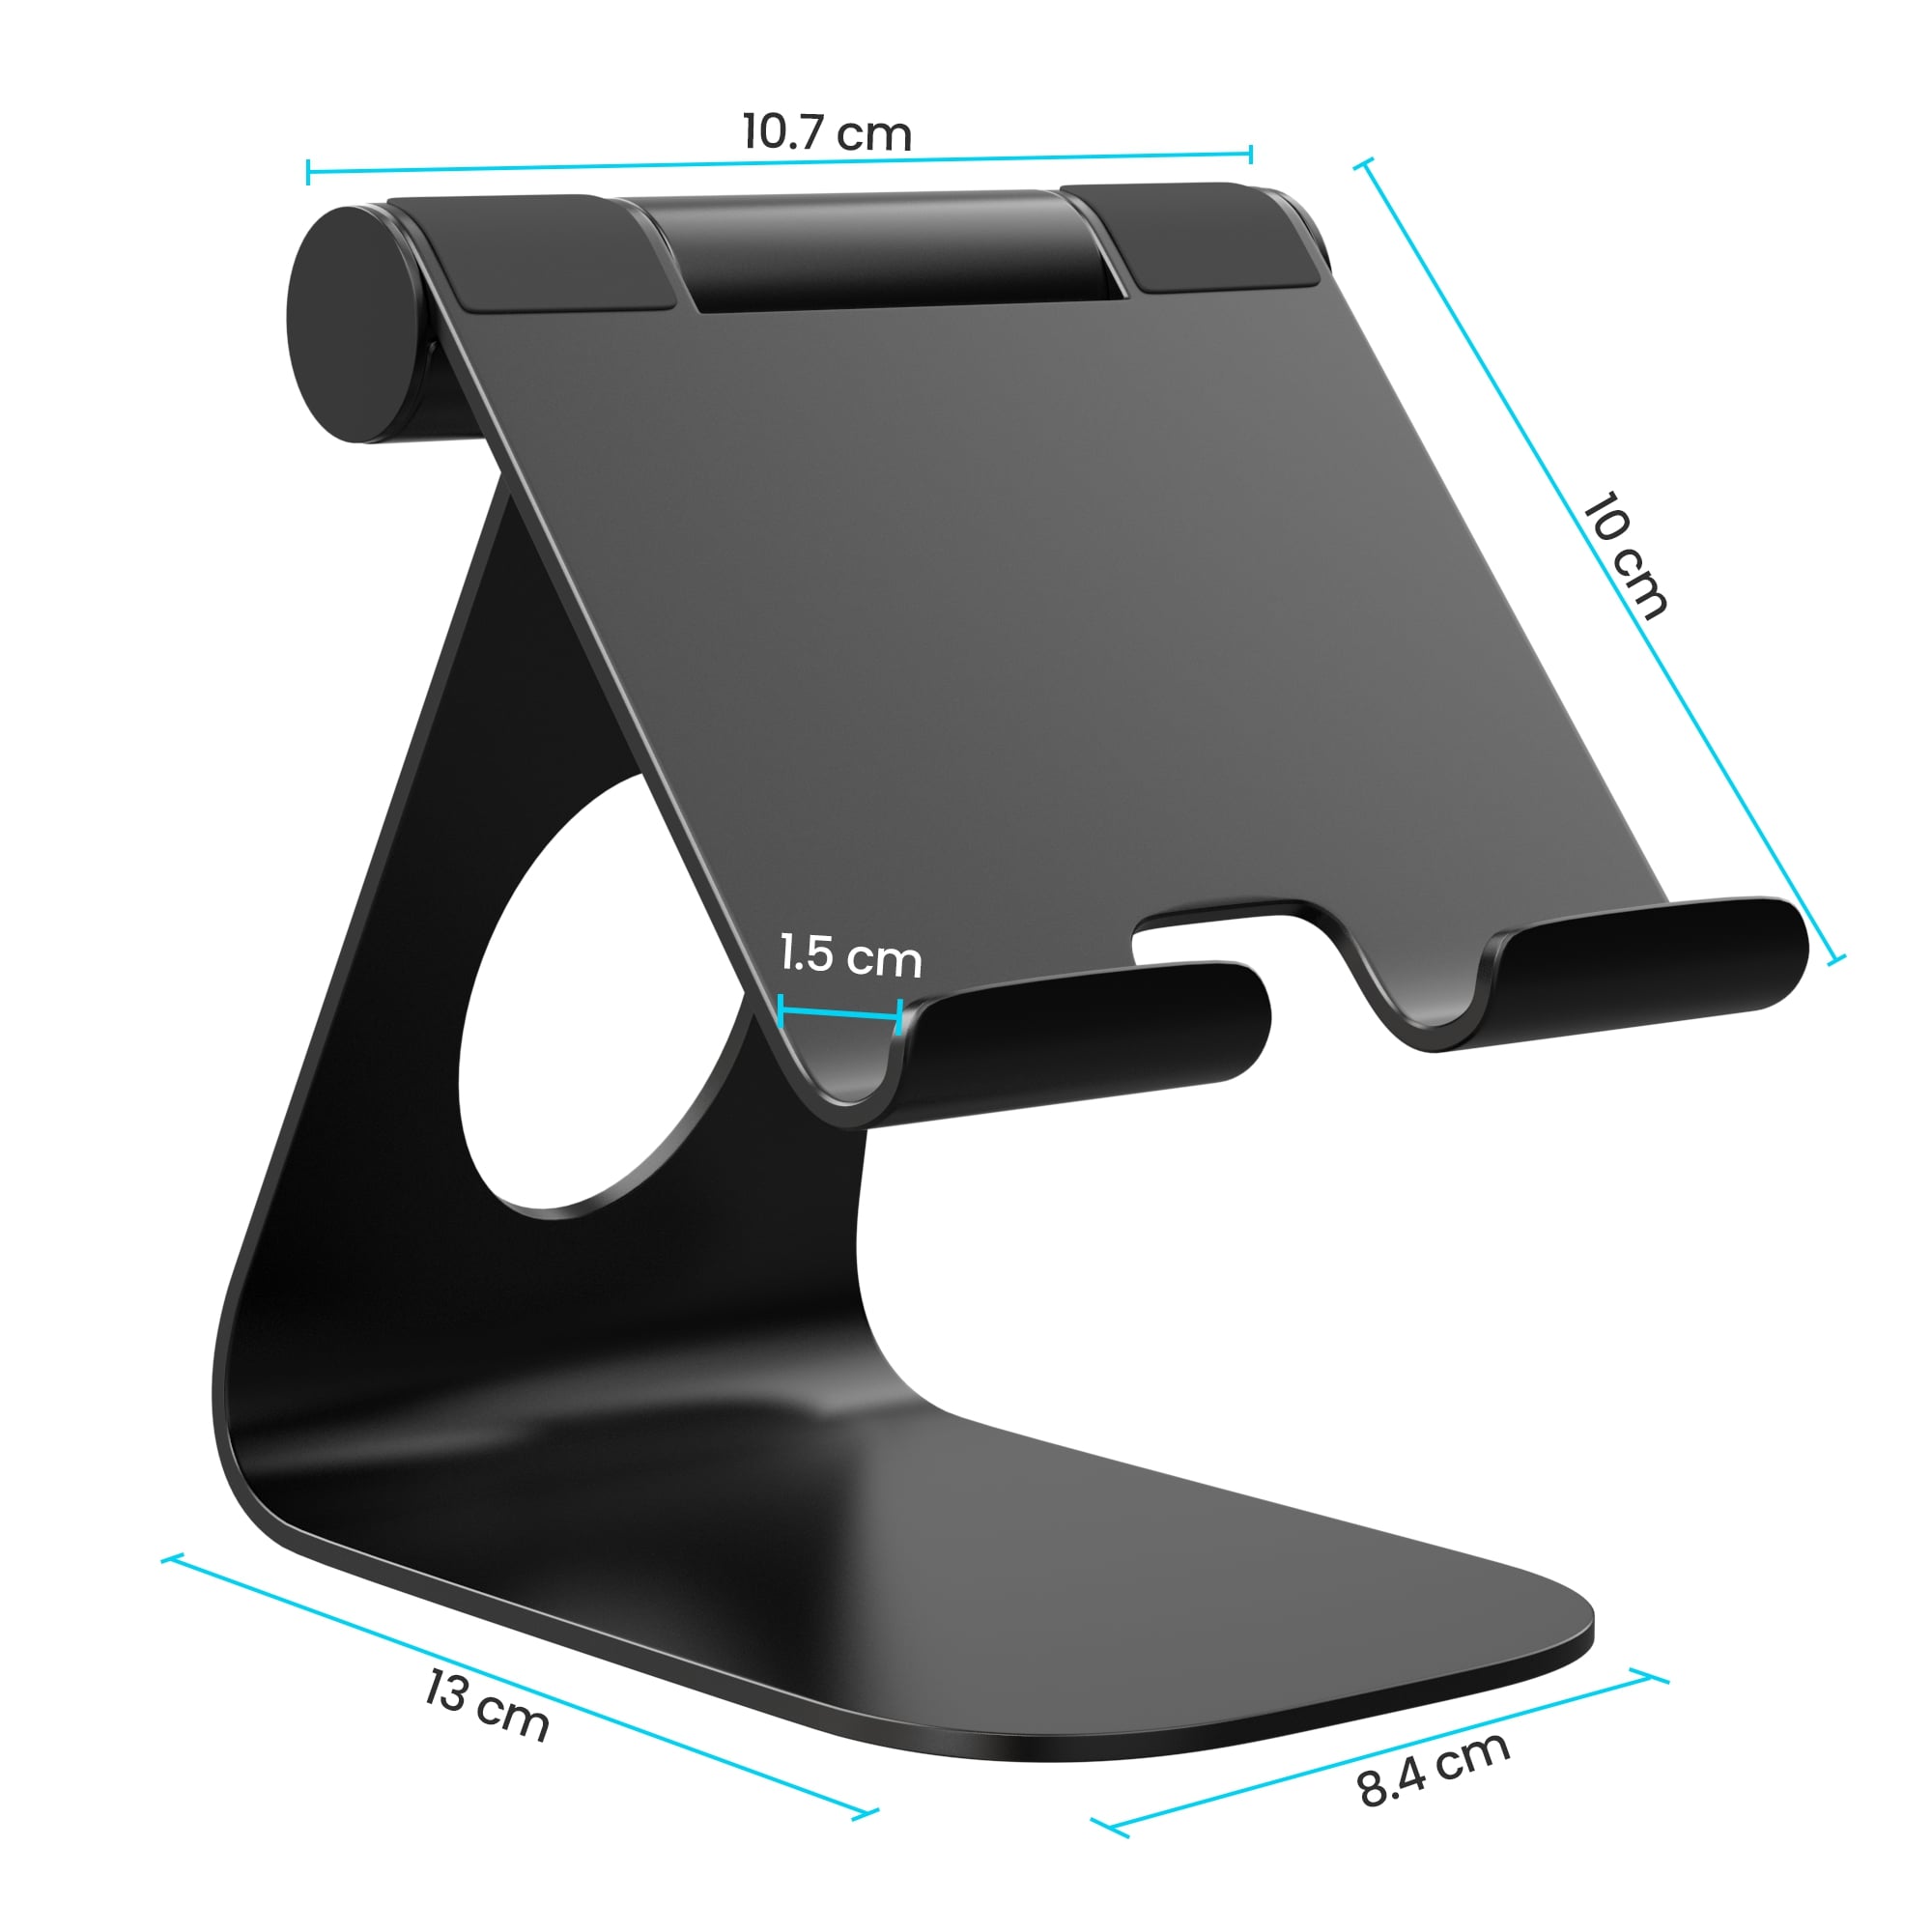 Adjustable Stand for iPad Mini & Tablet from 6 to 8 Inches